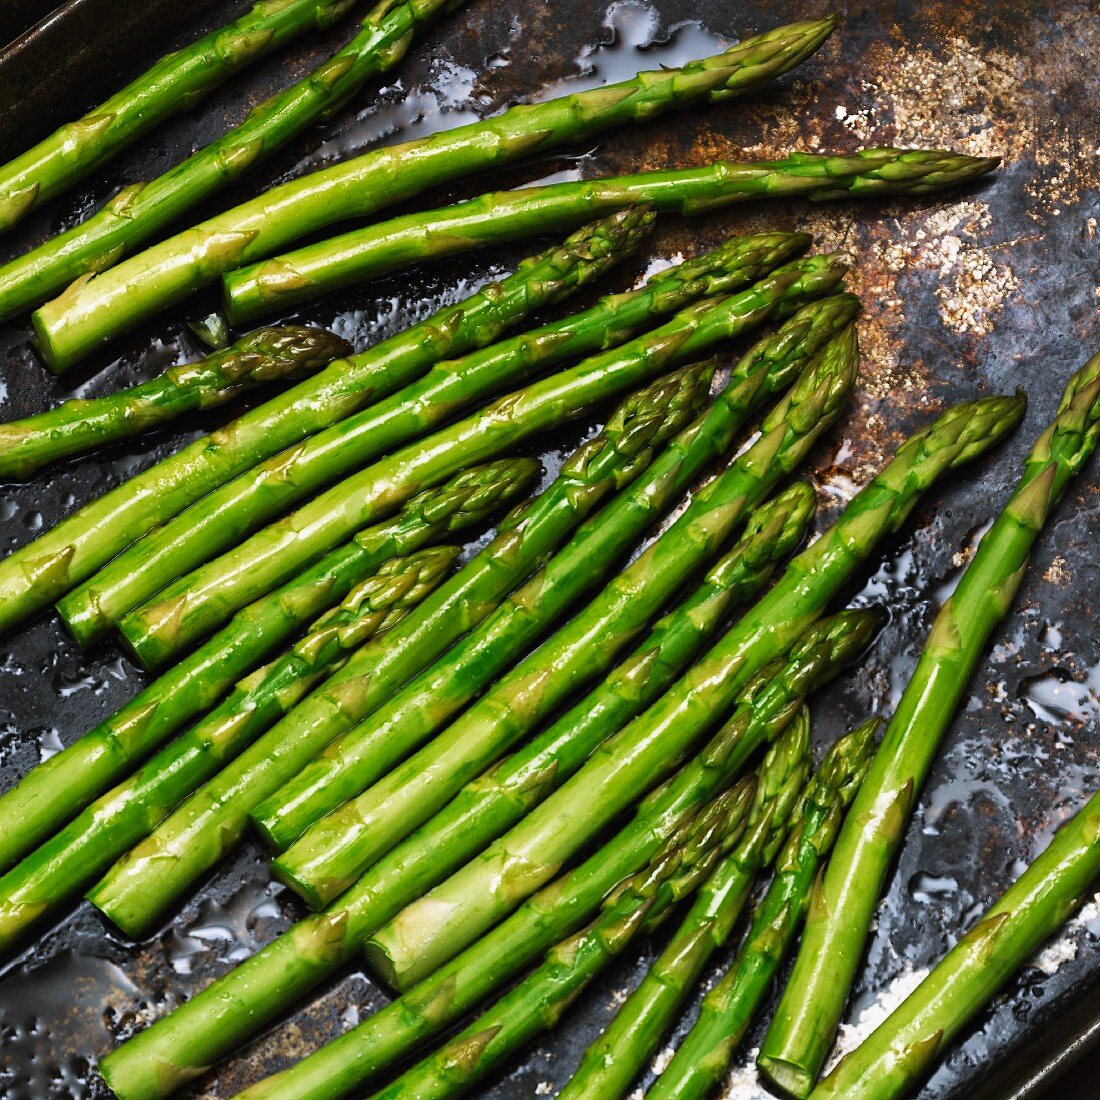 Green asparagus drizzled with olive oil on a baking tray